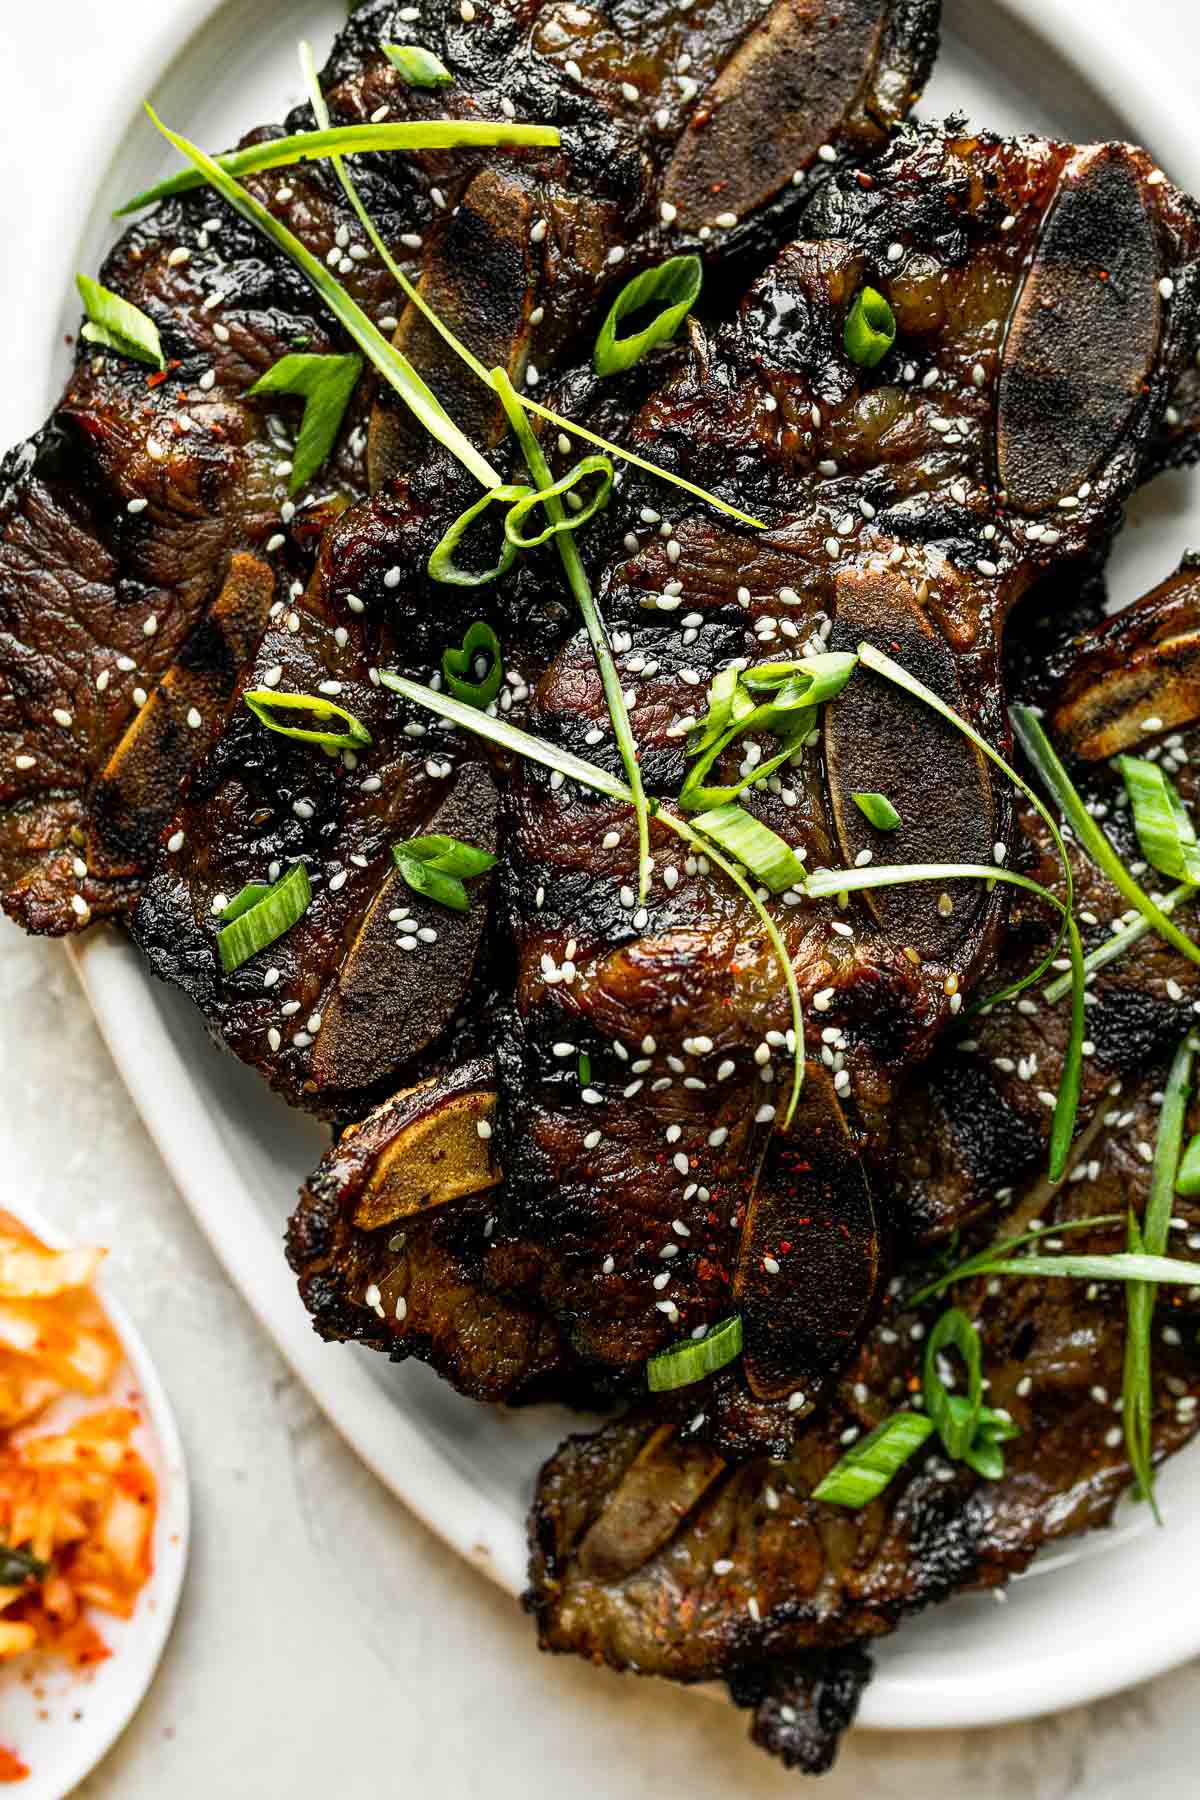 Grilled Beef Galbi (Korean-Style Marinated Short Ribs) Recipe